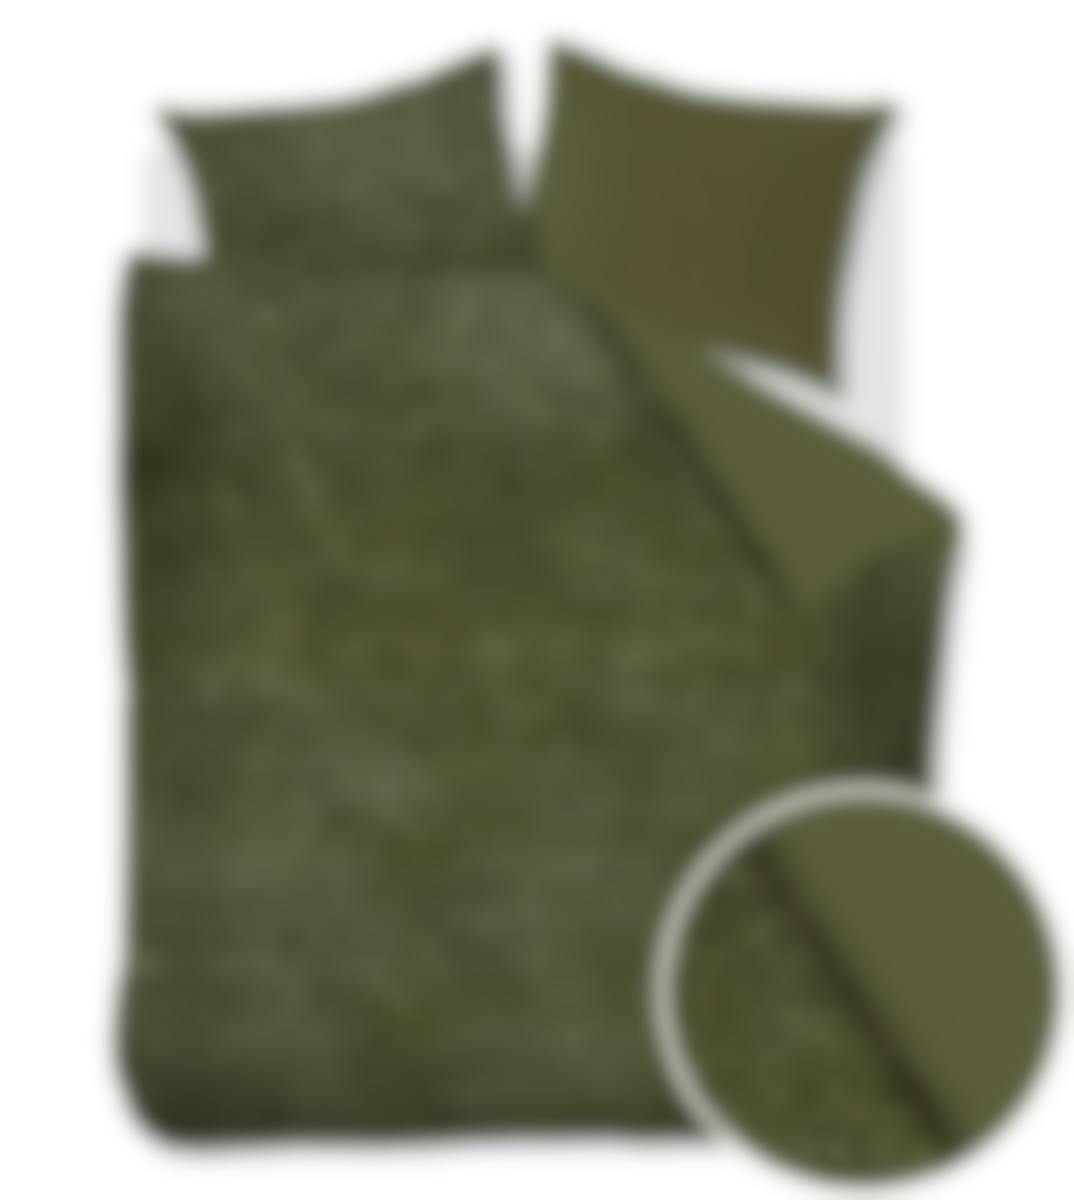 At Home by Beddinghouse housse de couette Cosy Corduroy Green Velours 200 x 200-220 cm